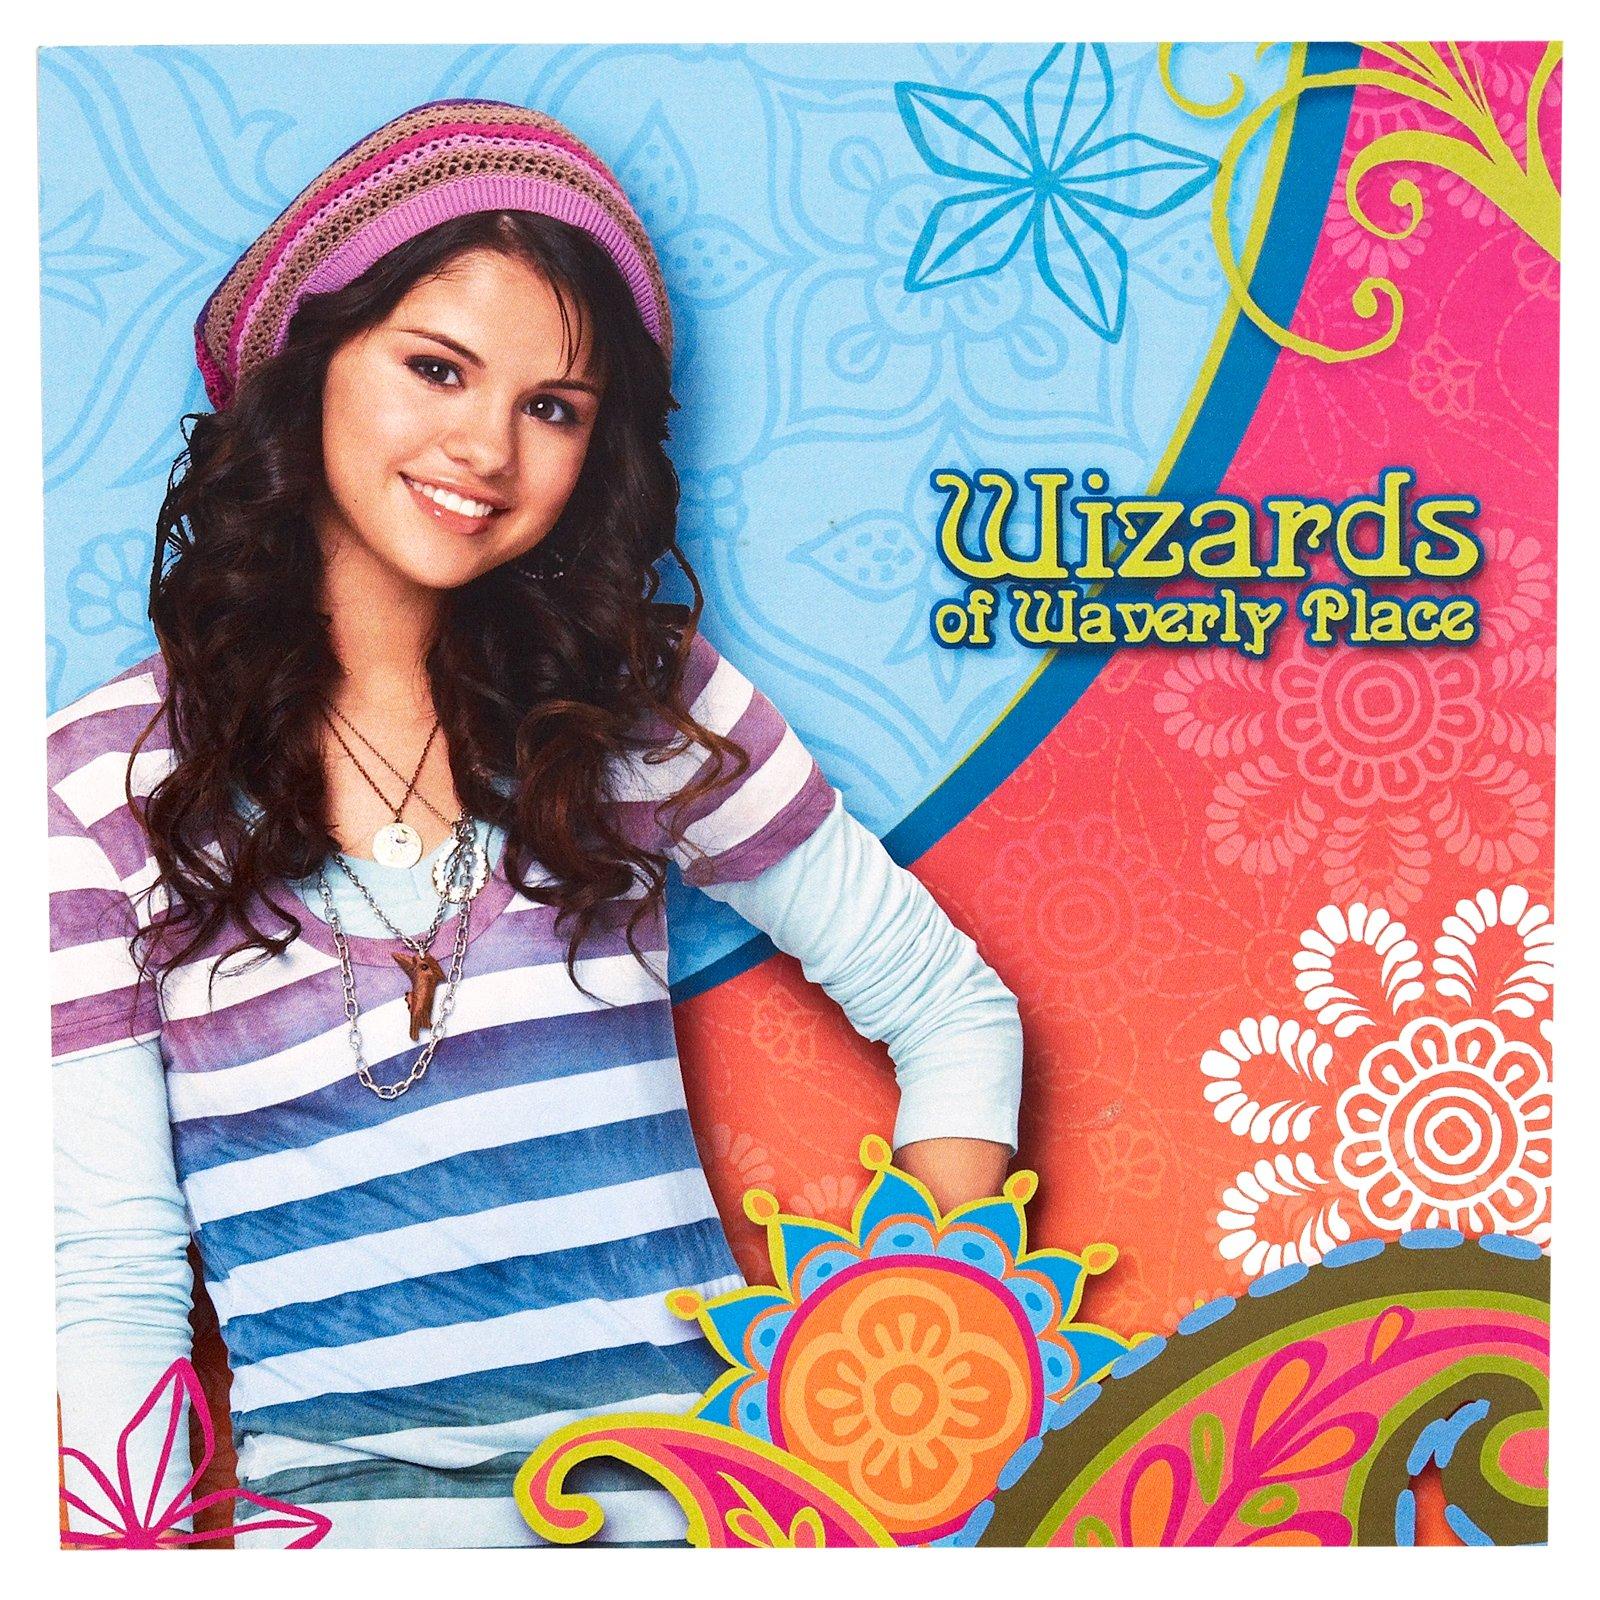 More rare pics from Selena's photohoot for Wizards Of